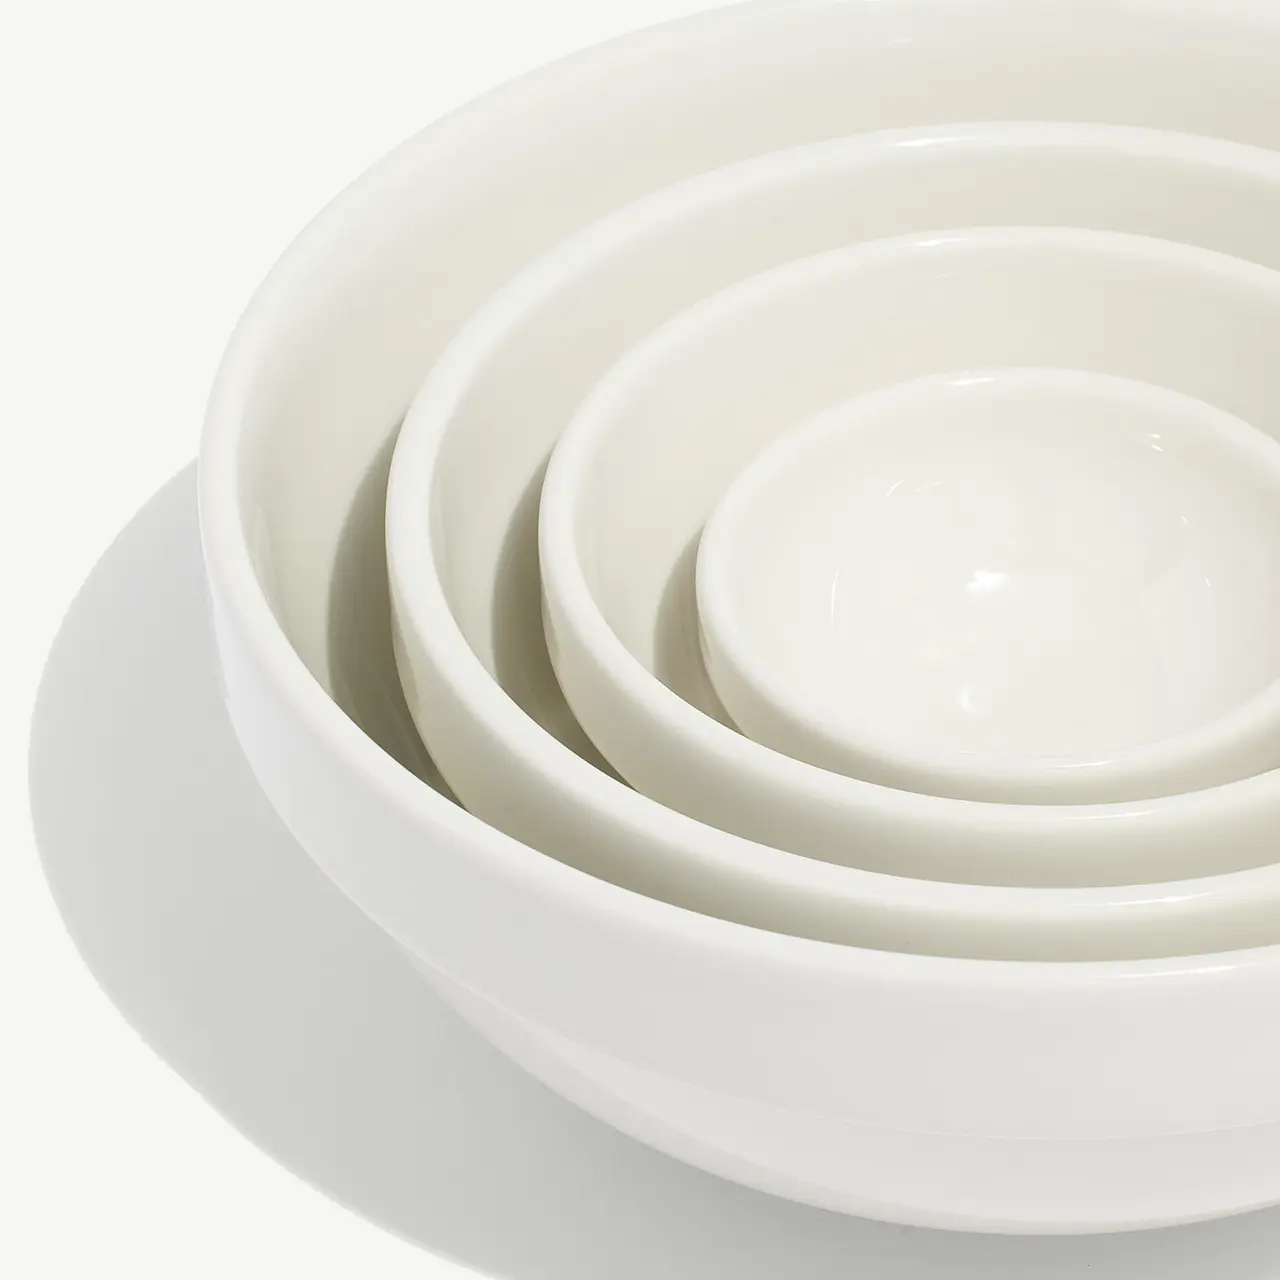 A stack of clean, white nested bowls decreasing in size from large to small on a plain background.